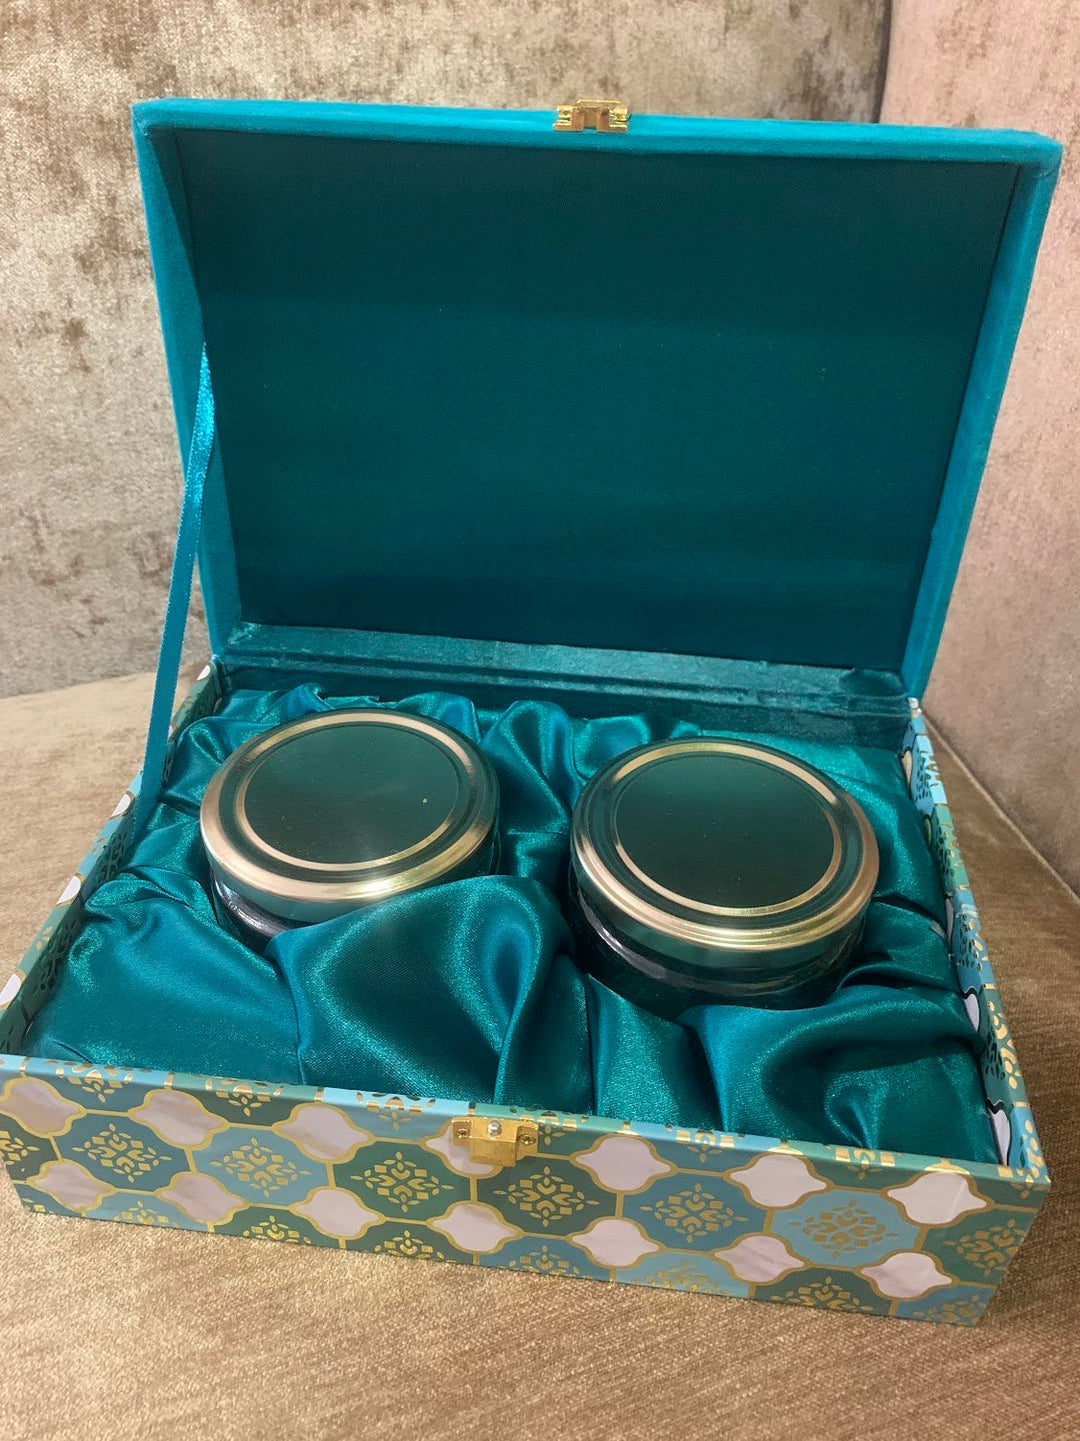 Diwali Luxury Velvet Gift Box with 2 Jars of Dried Fruits